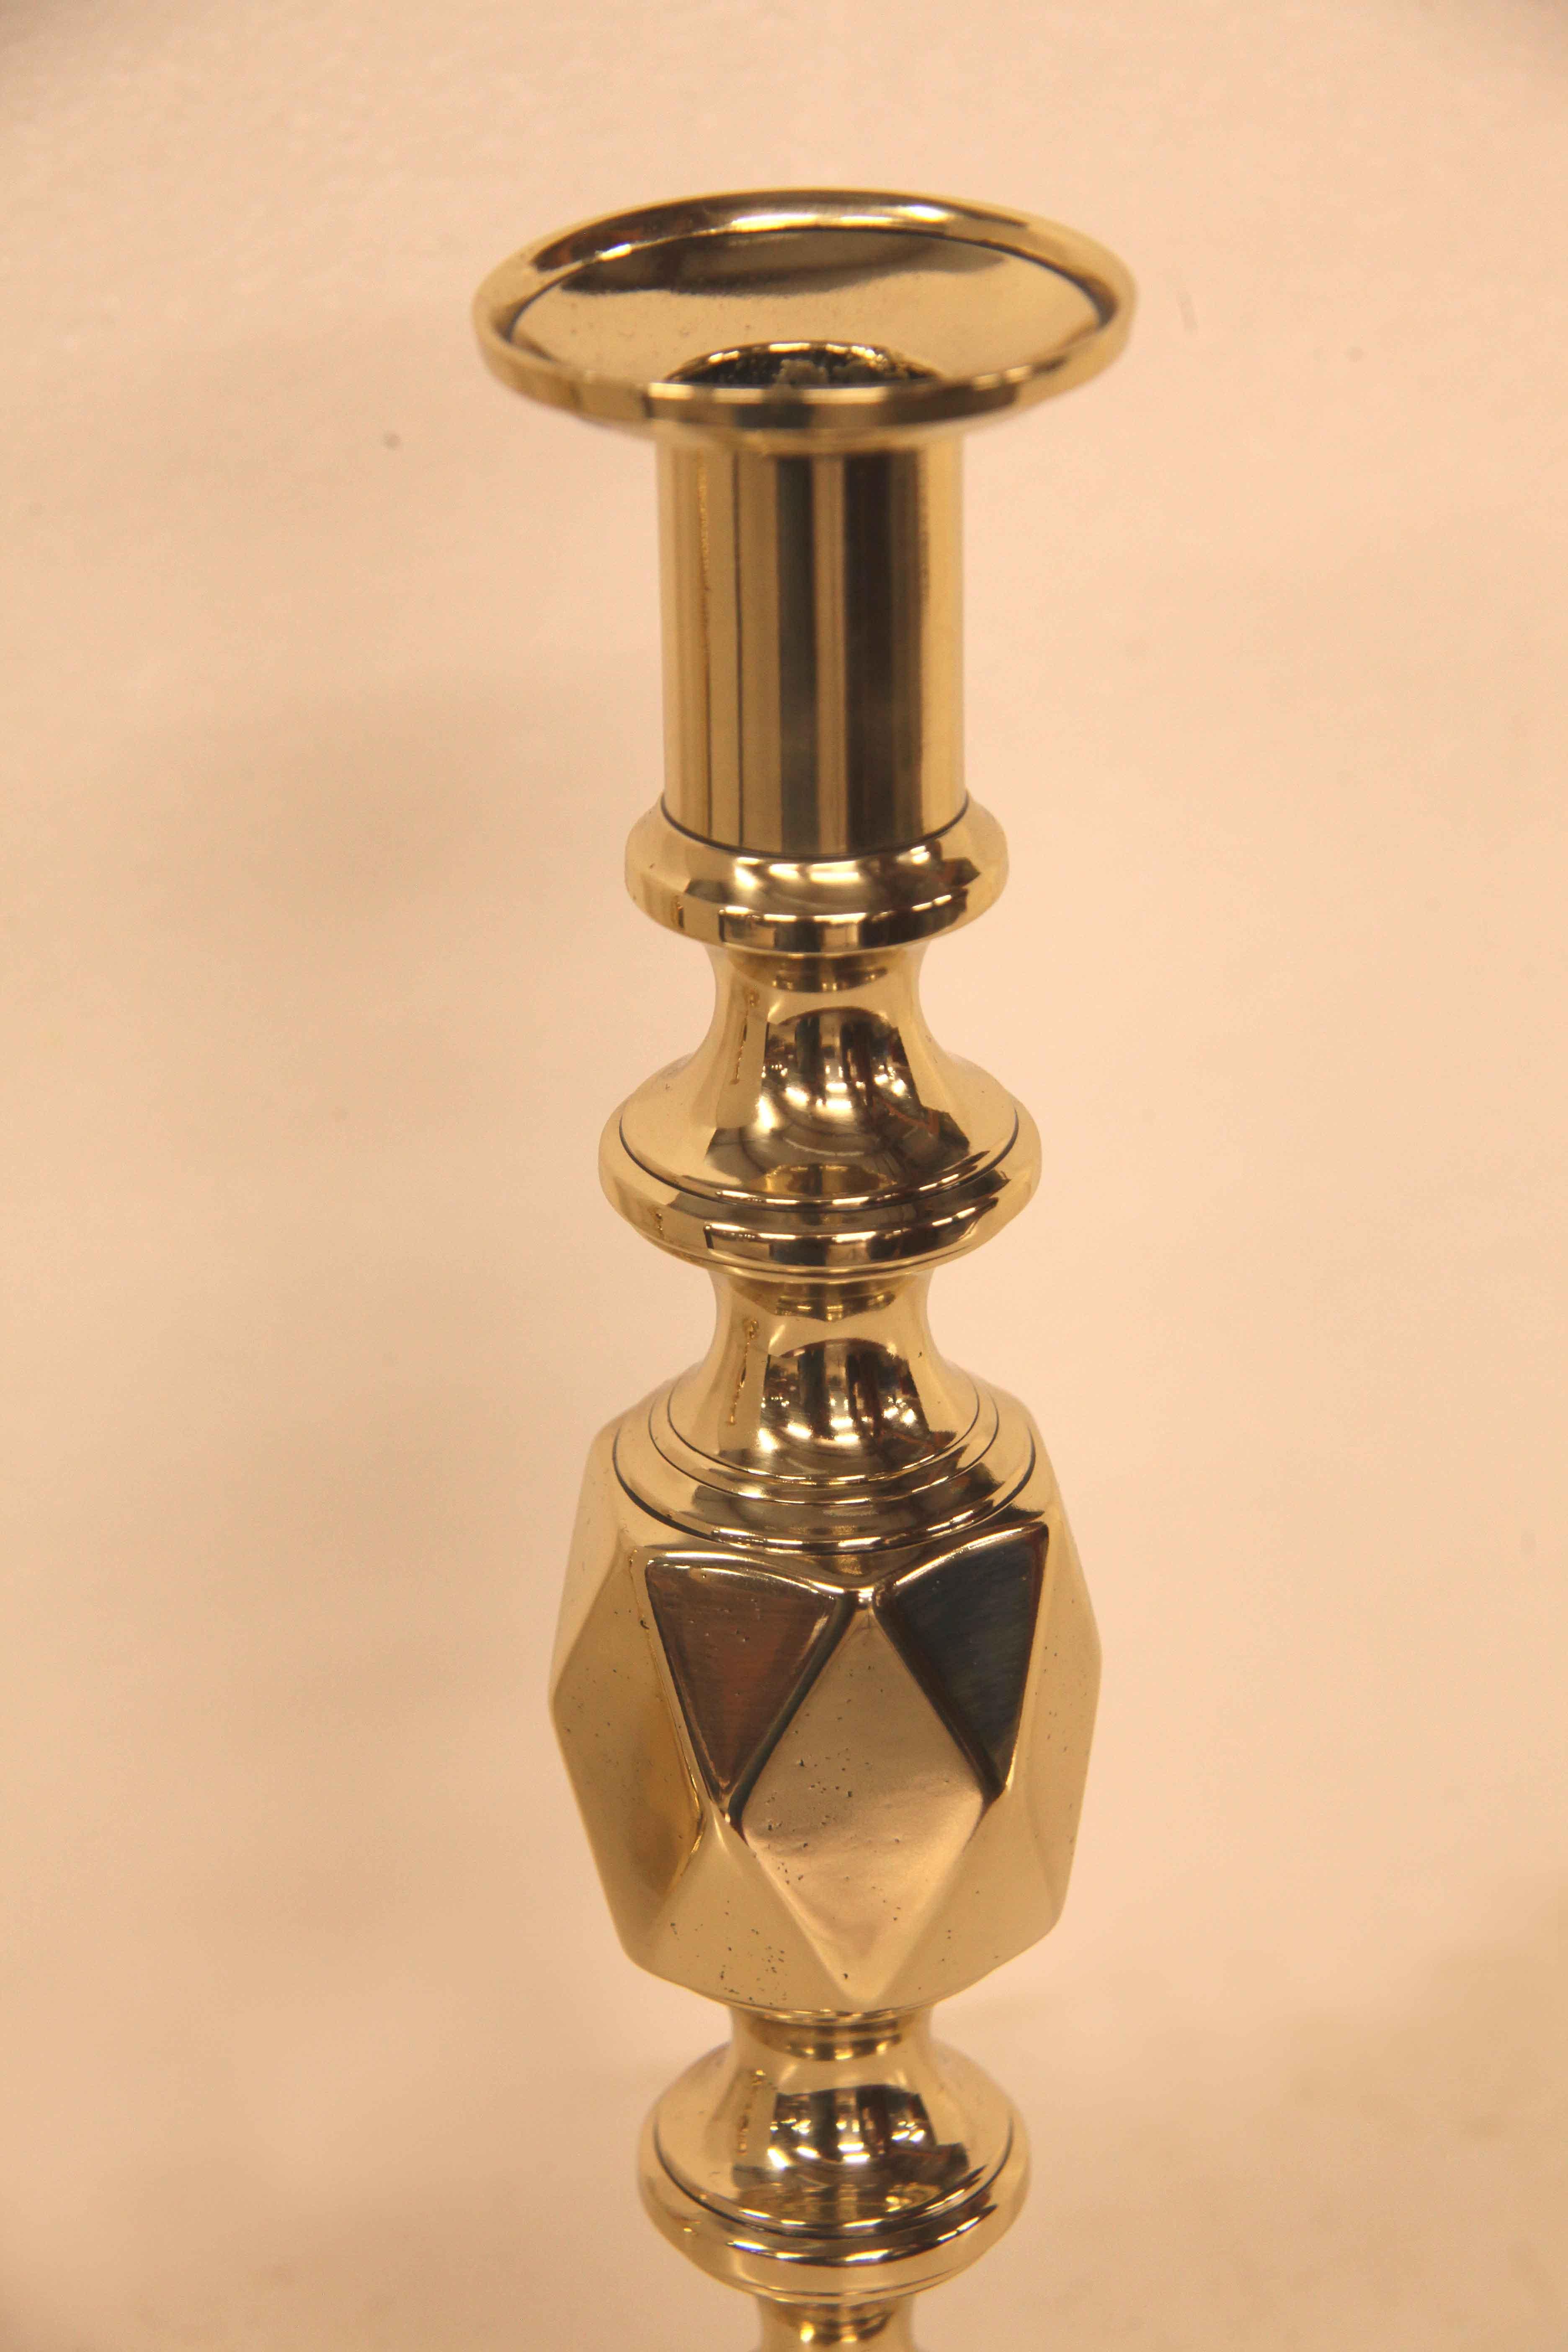 Pair of English brass ''Queen of Diamonds'' candlesticks, this pair are from the famous diamond candlestick series that have been collected for generations ( serious collectors hunt for and find the entire series) From smallest to largest they